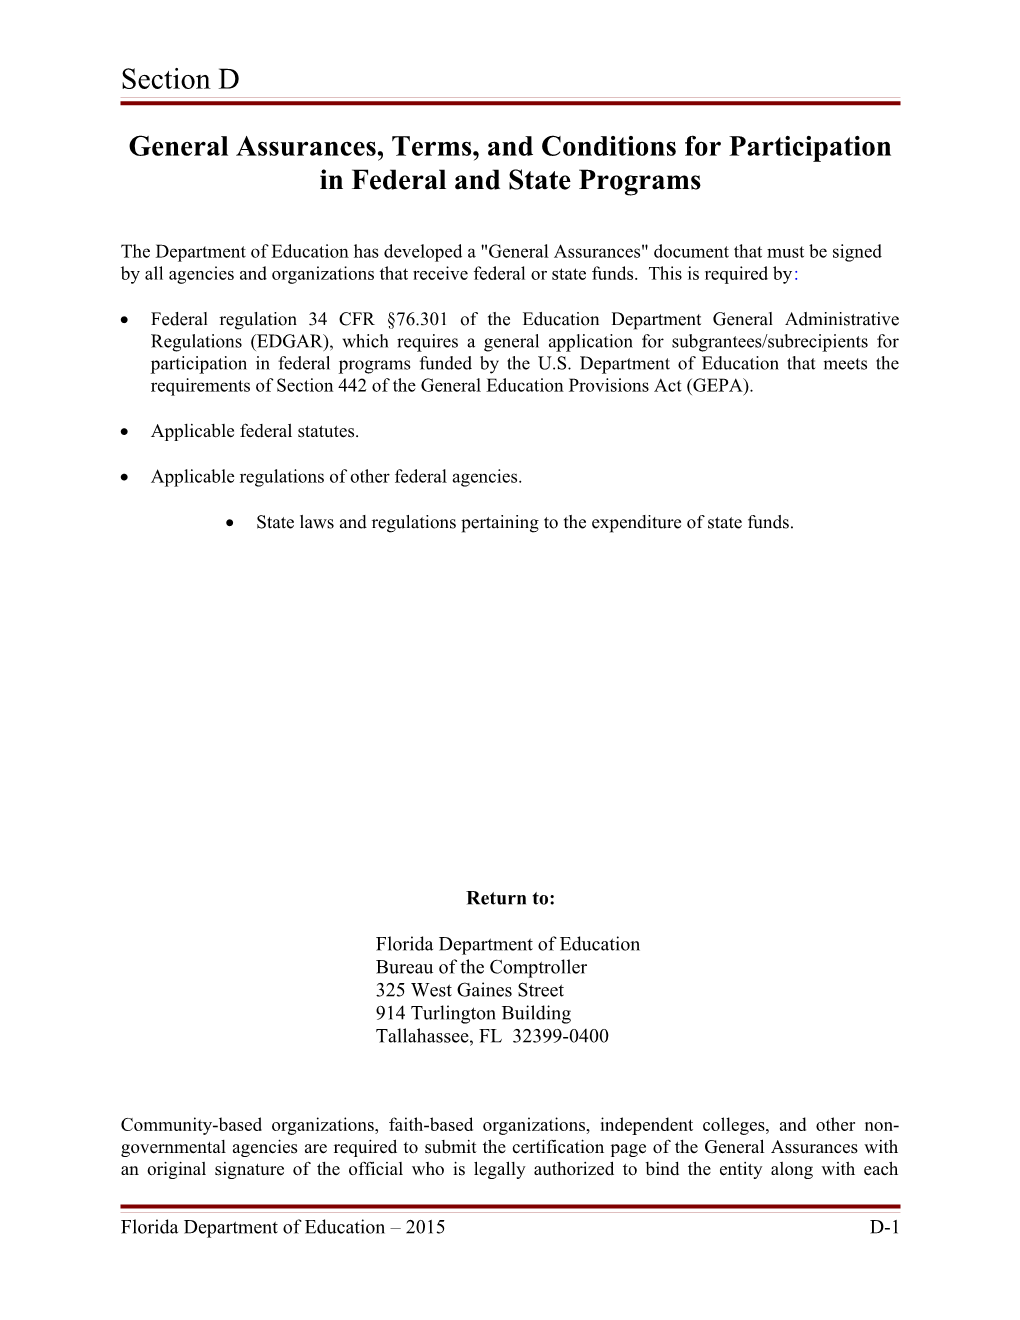 General Assurances, Terms, and Conditions for Participation in Federal and State Programs